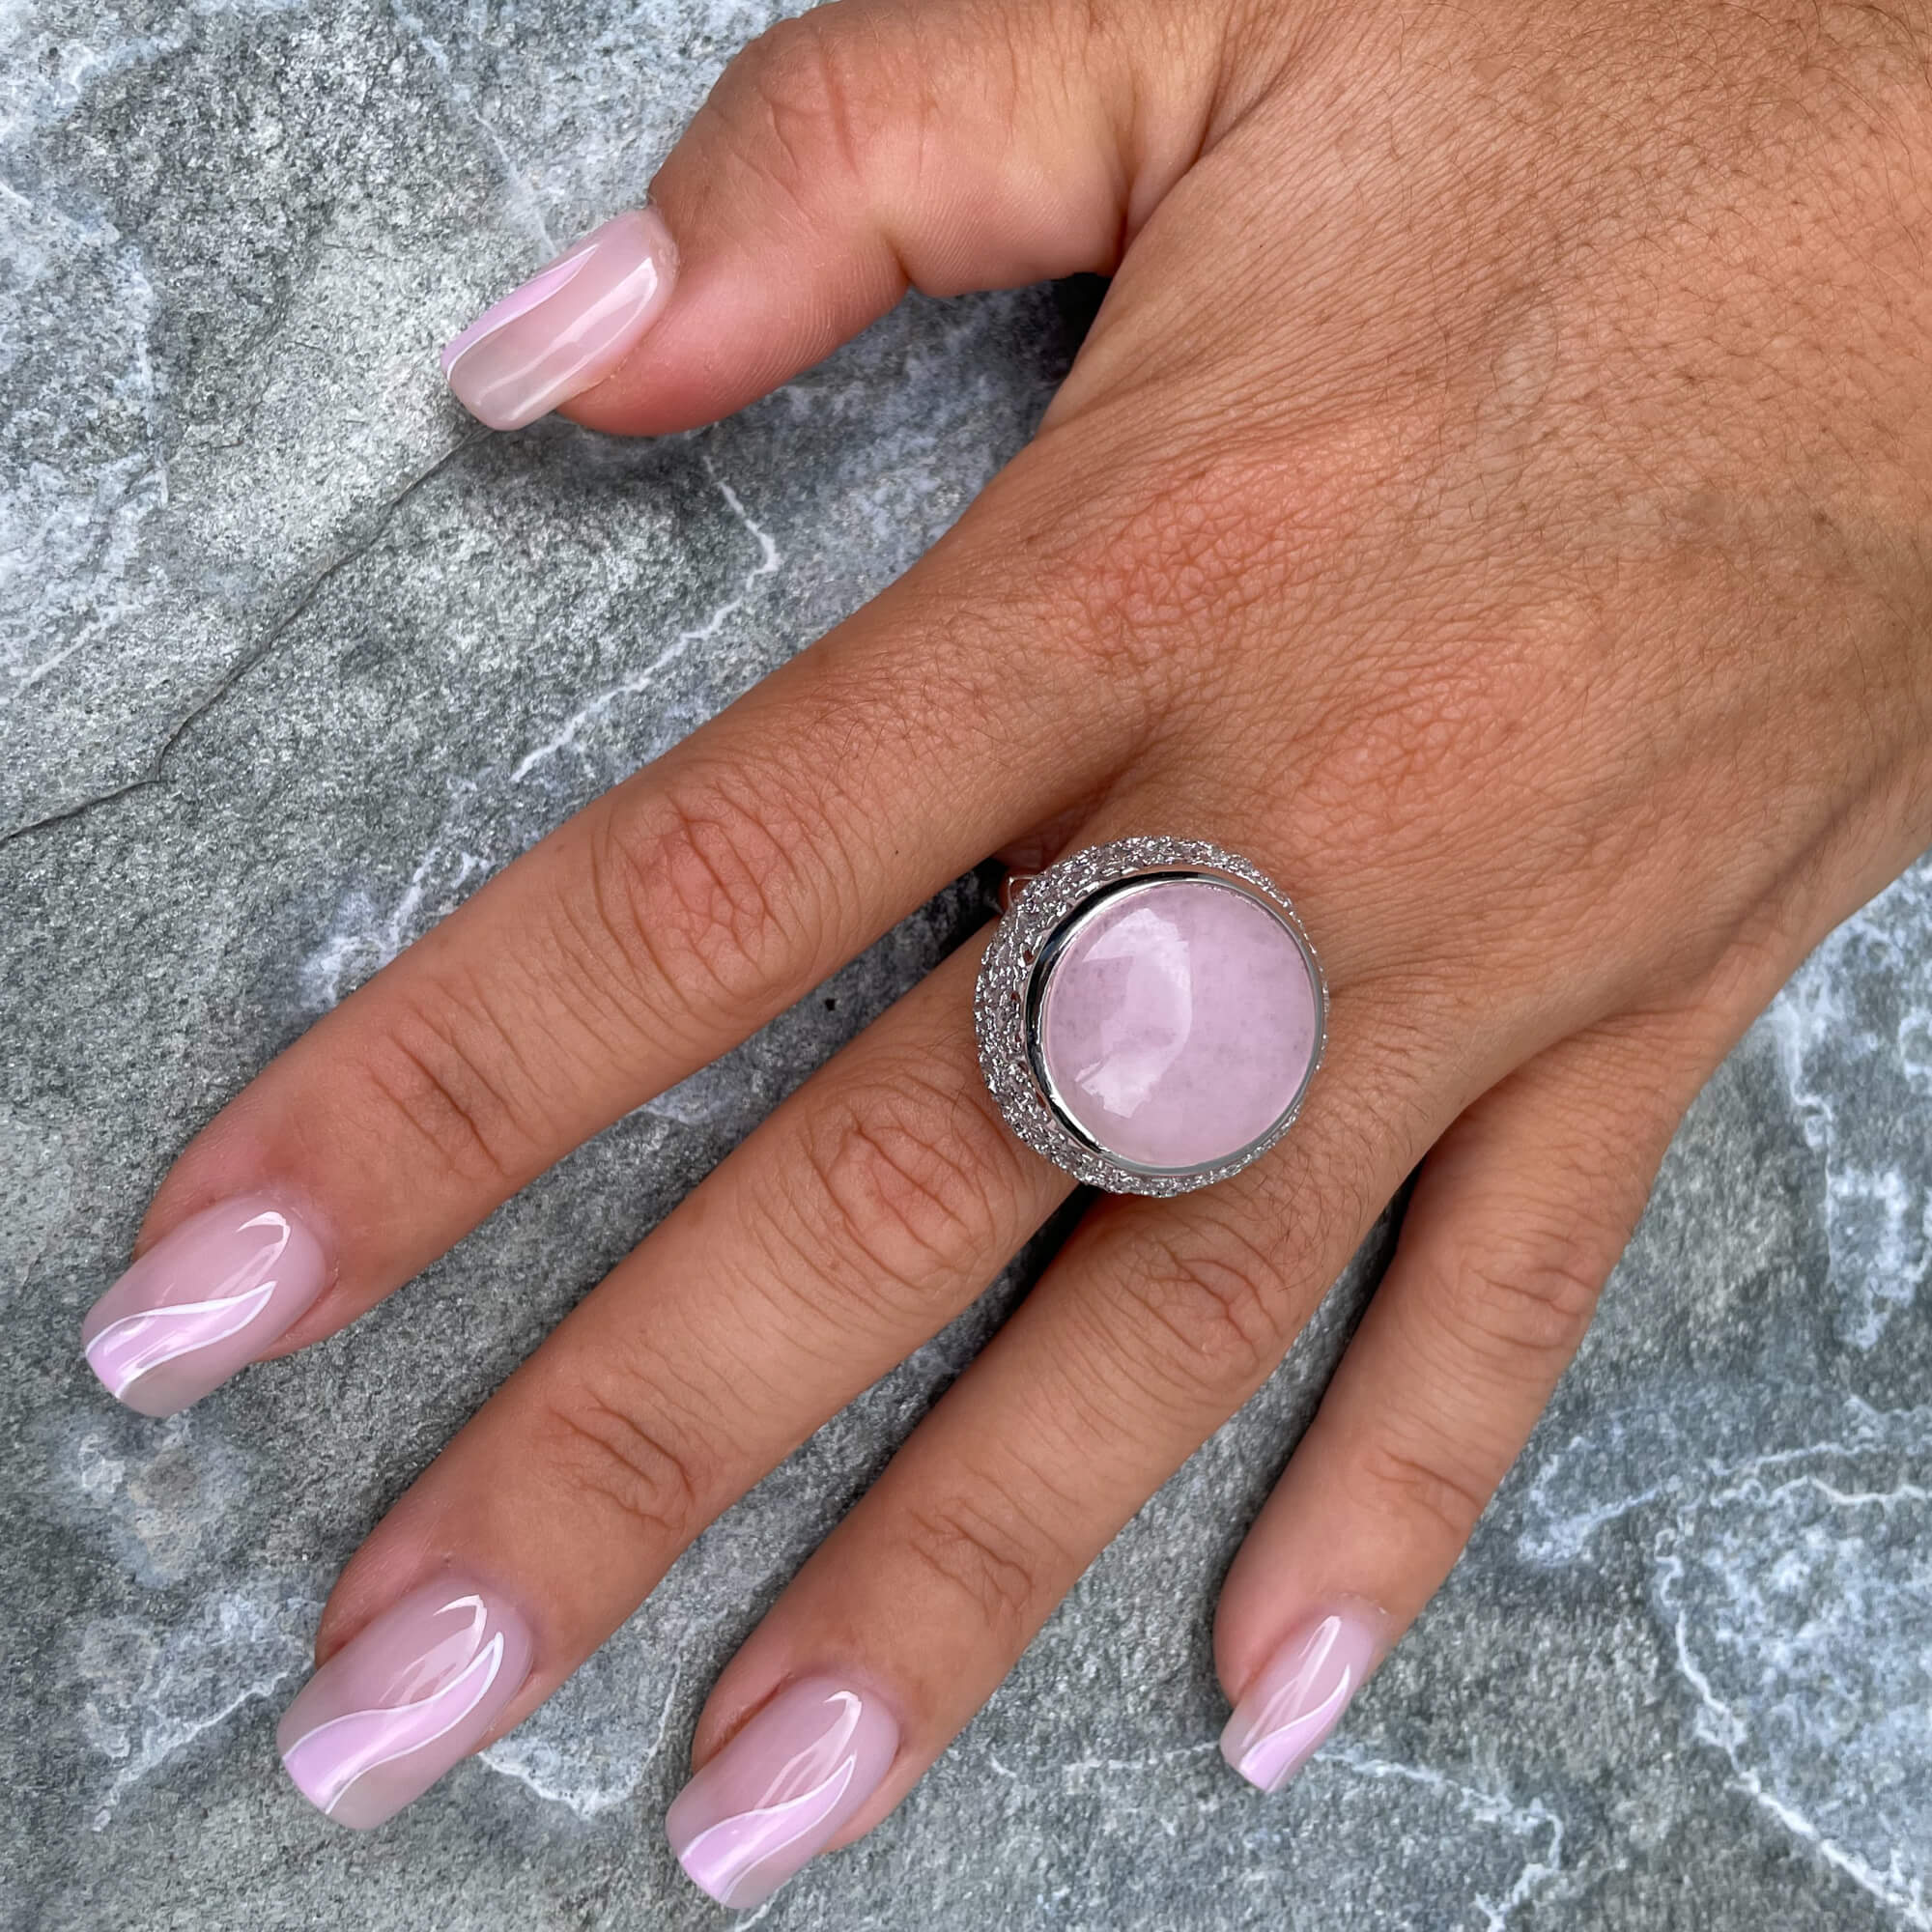 Crafted silver ring with a pink quartz stone